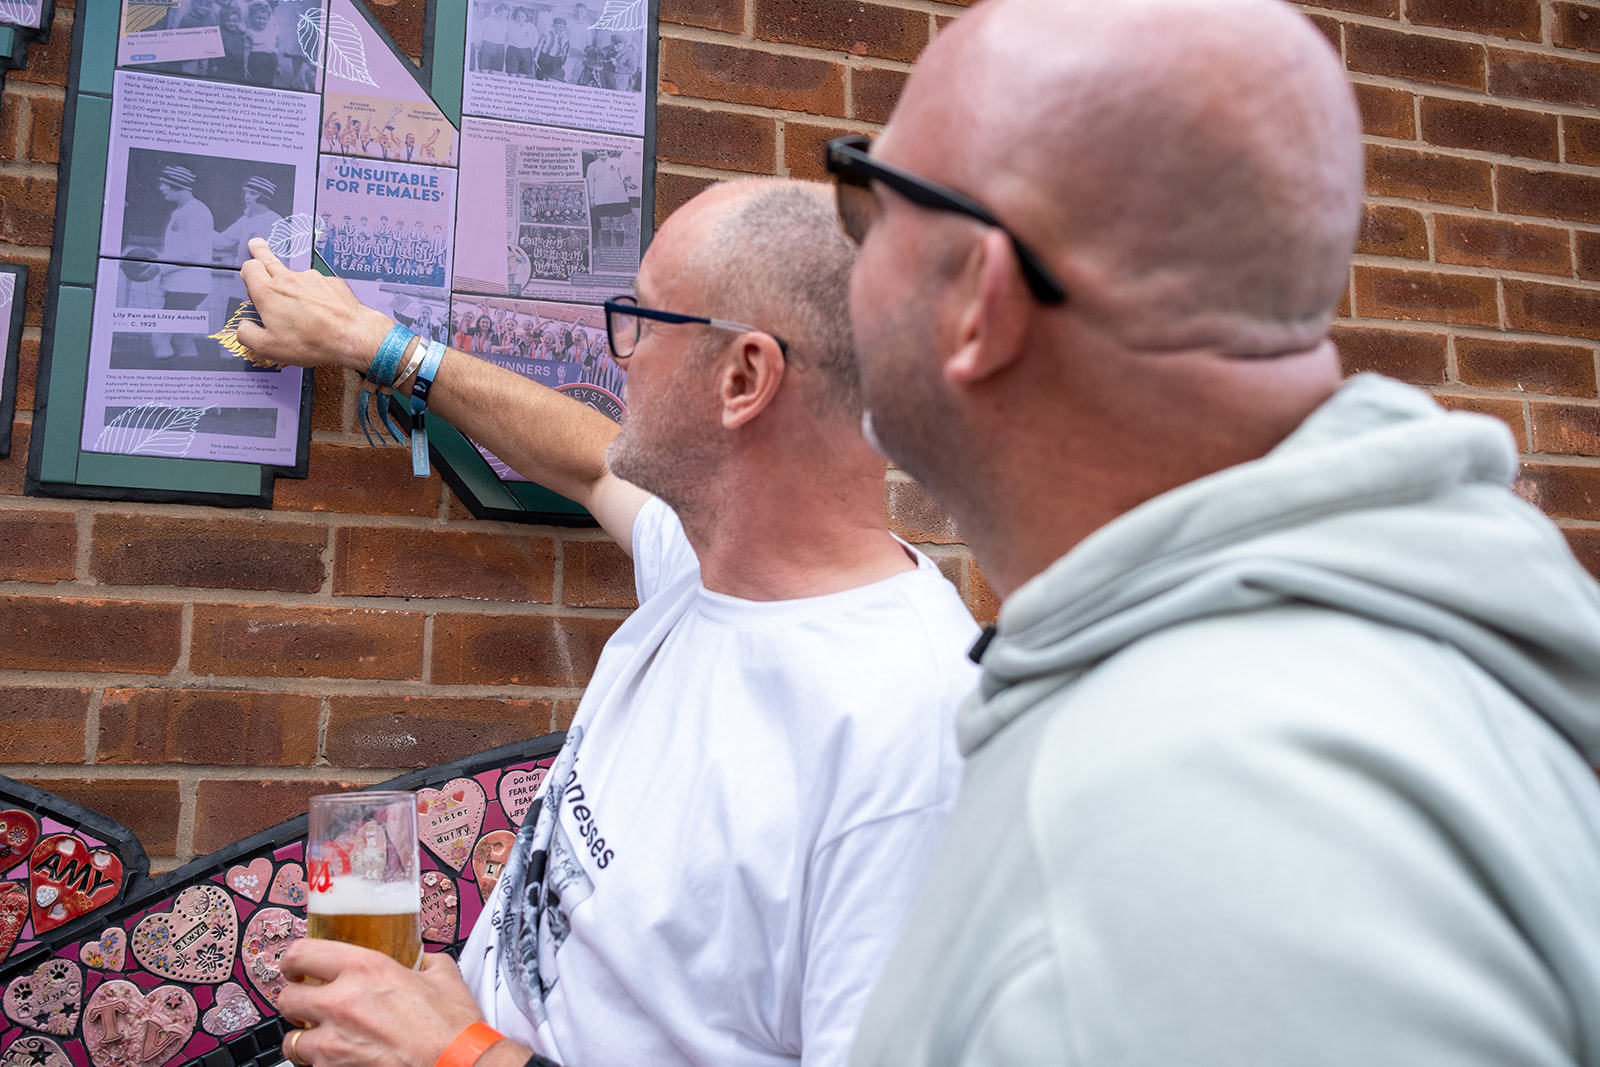 Two men point at the tiles on the Strong Women of St Helens mural, they are printed with historic photos and text.